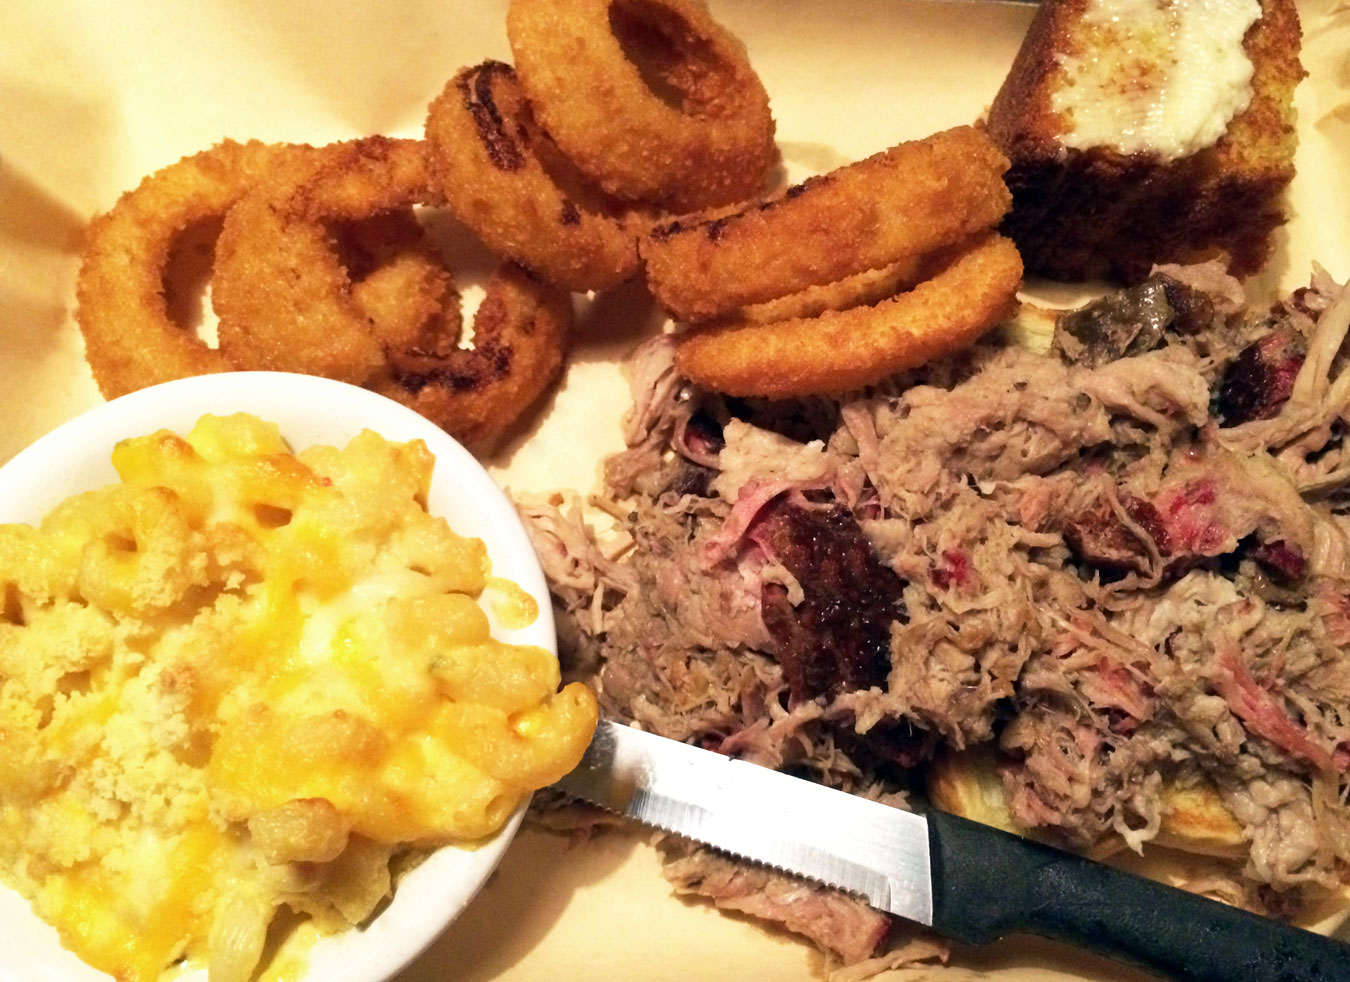 5 Best Places To Get Amazing Barbecue In Metro Detroit - Looking for the best BBQ in Greater Detroit? Click through for five mouth-watering favorites that will satisfy every barbecue-loving fan's tastebuds! [via Wading in Big Shoes]